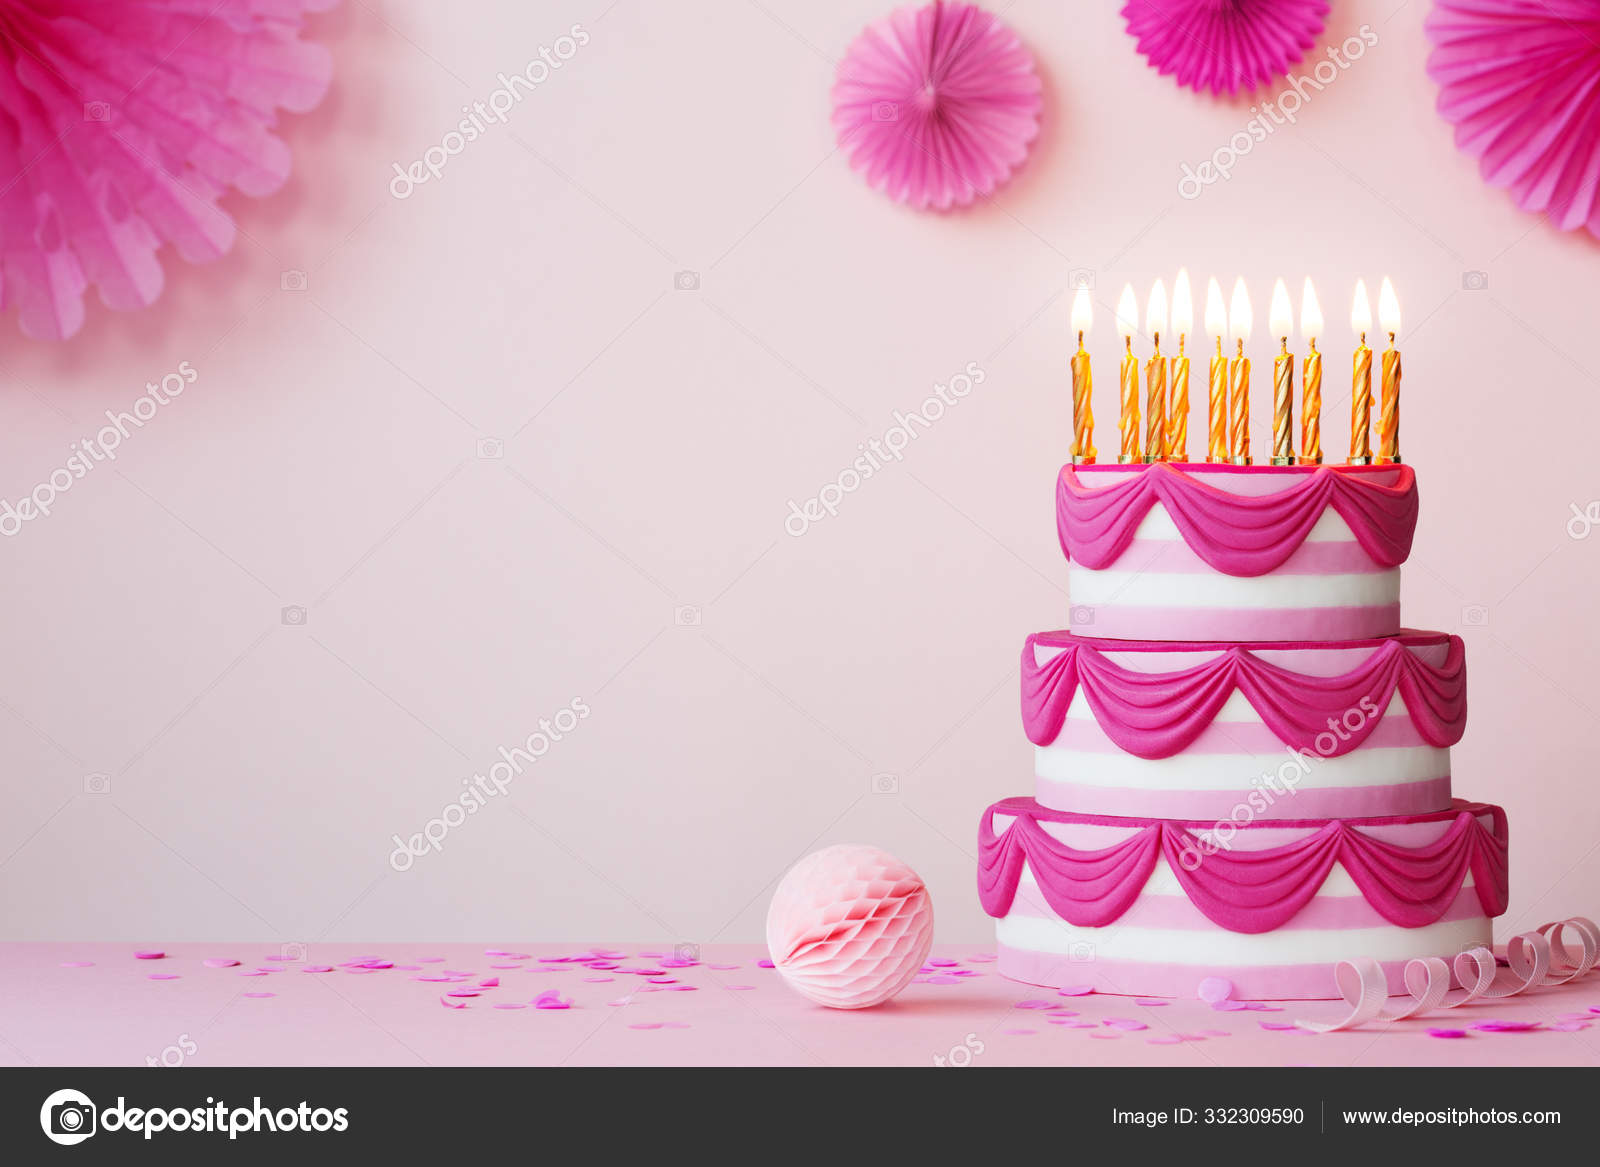 Birthday party with pink tiered cake Stock Photo by ©RuthBlack 332309590